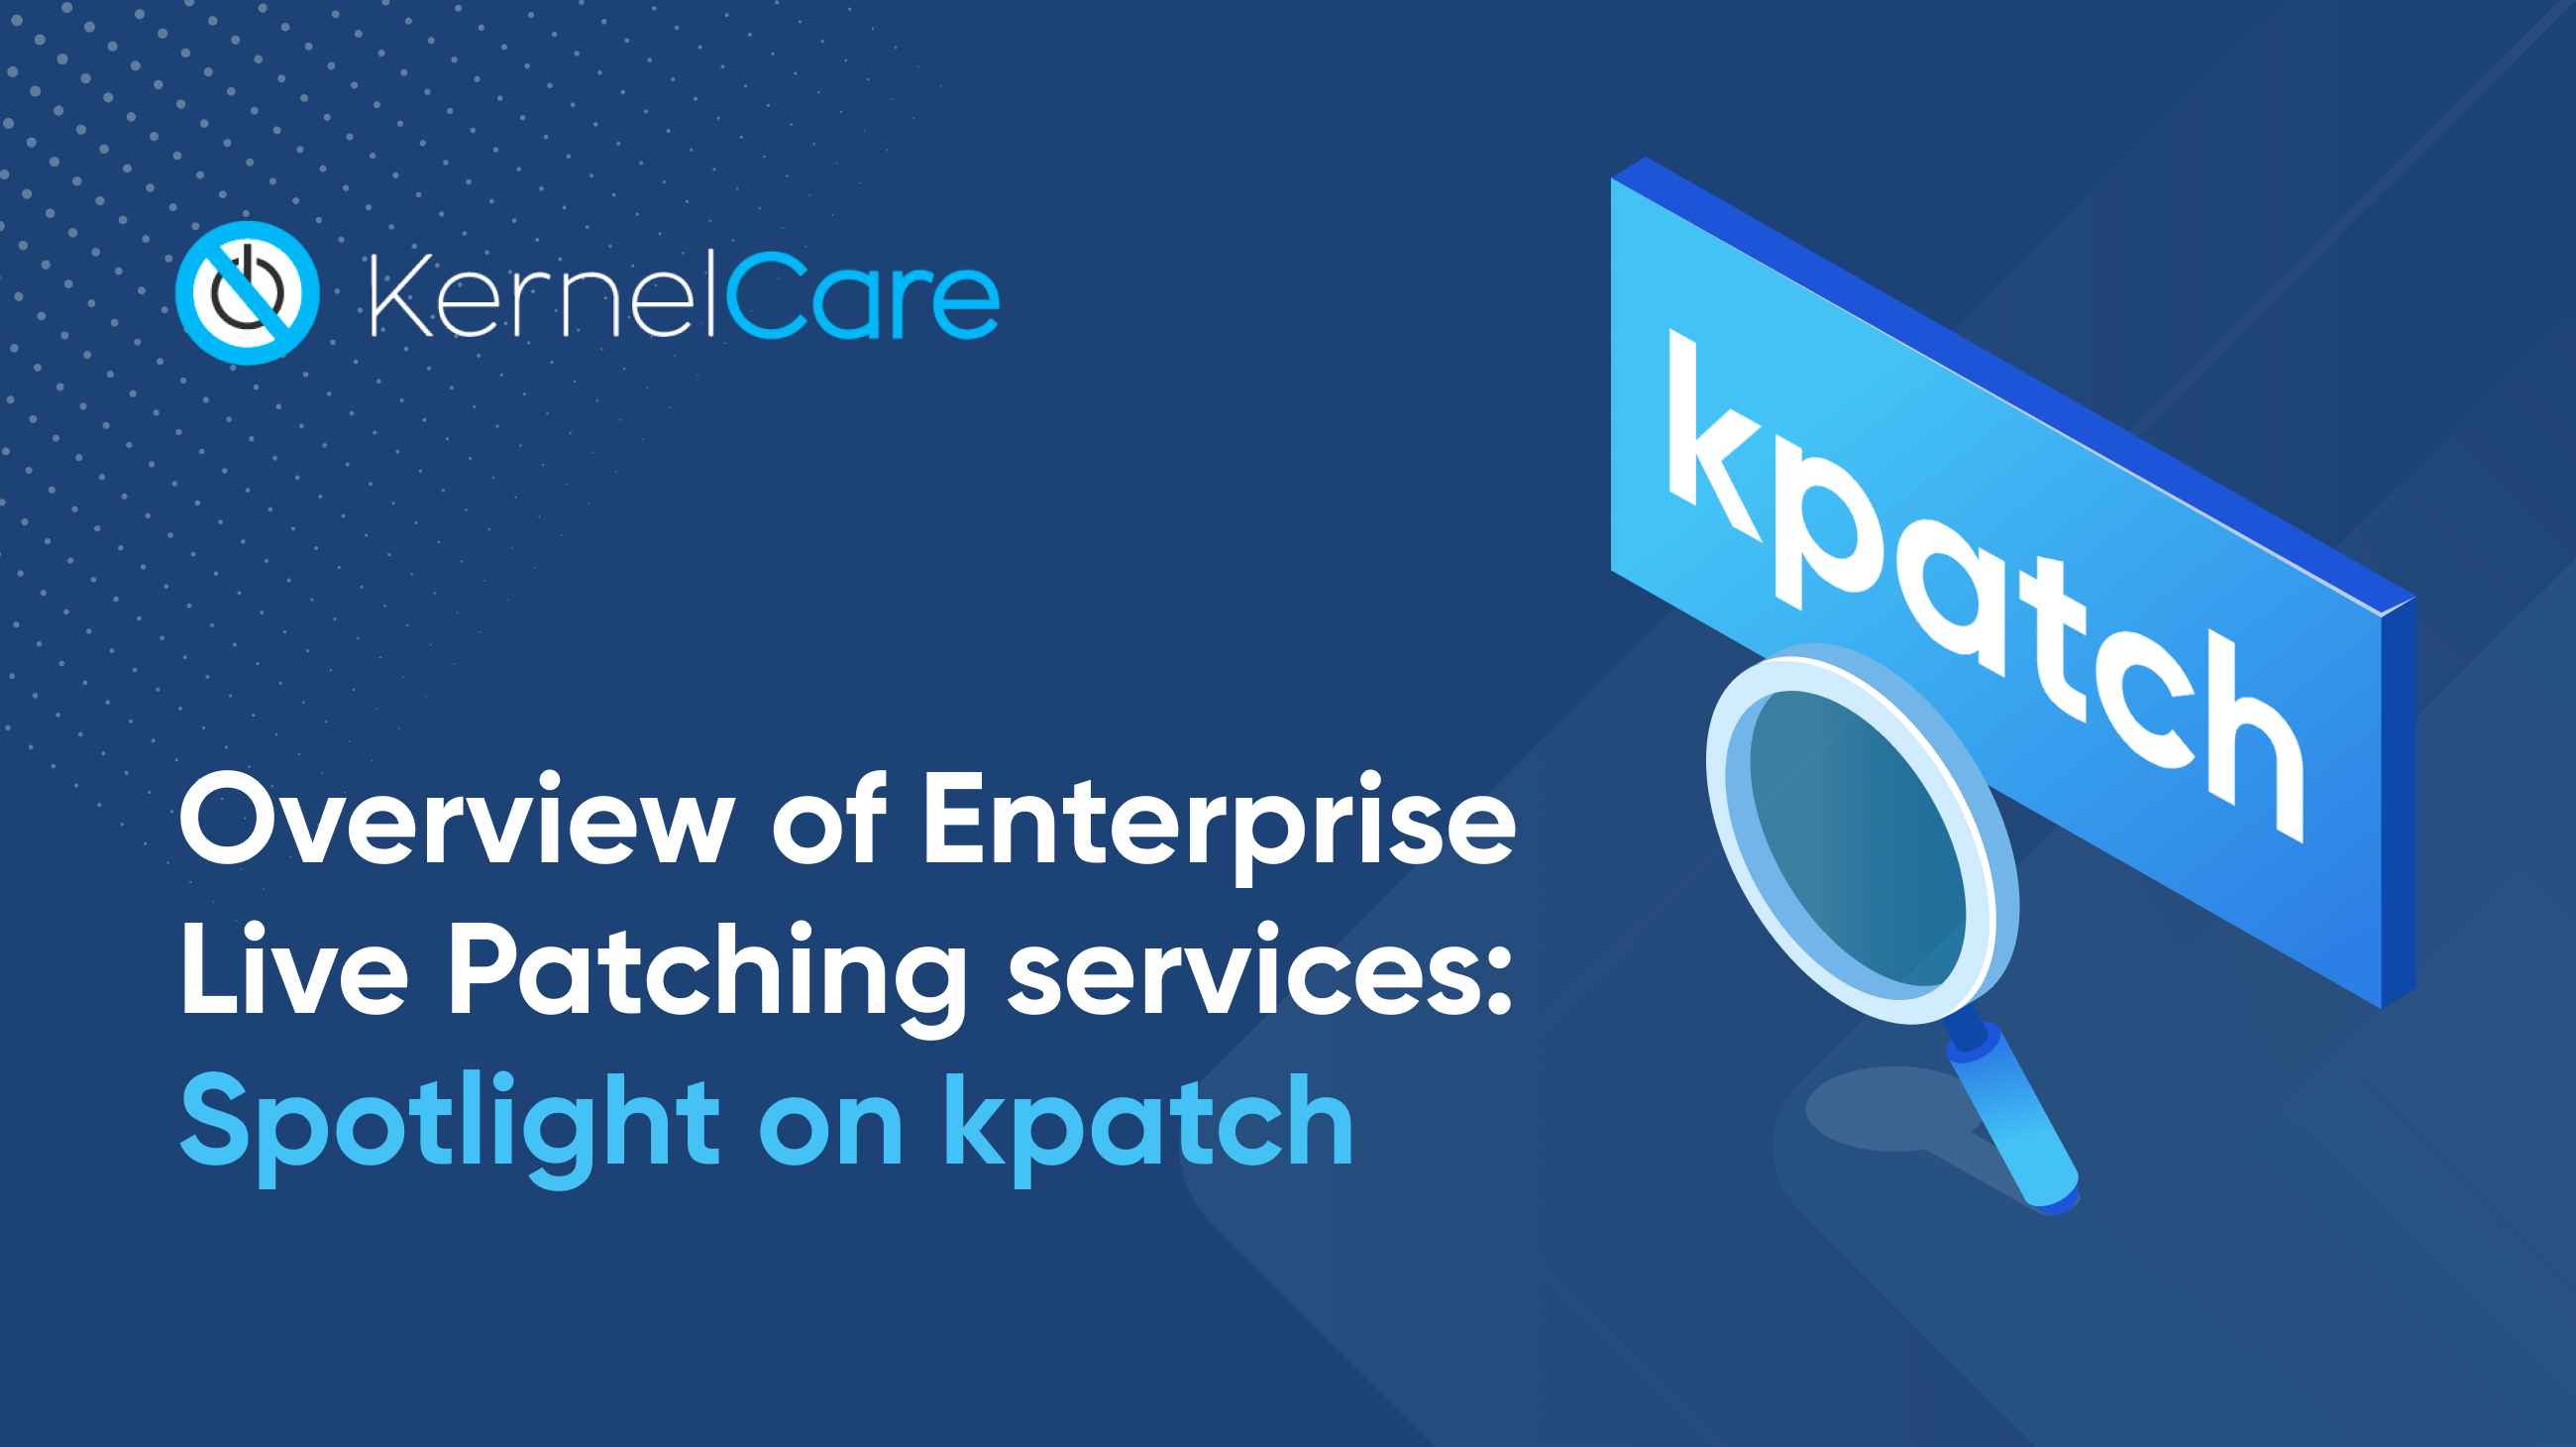 kpatch: Overview of Enterprise Live Patching Services